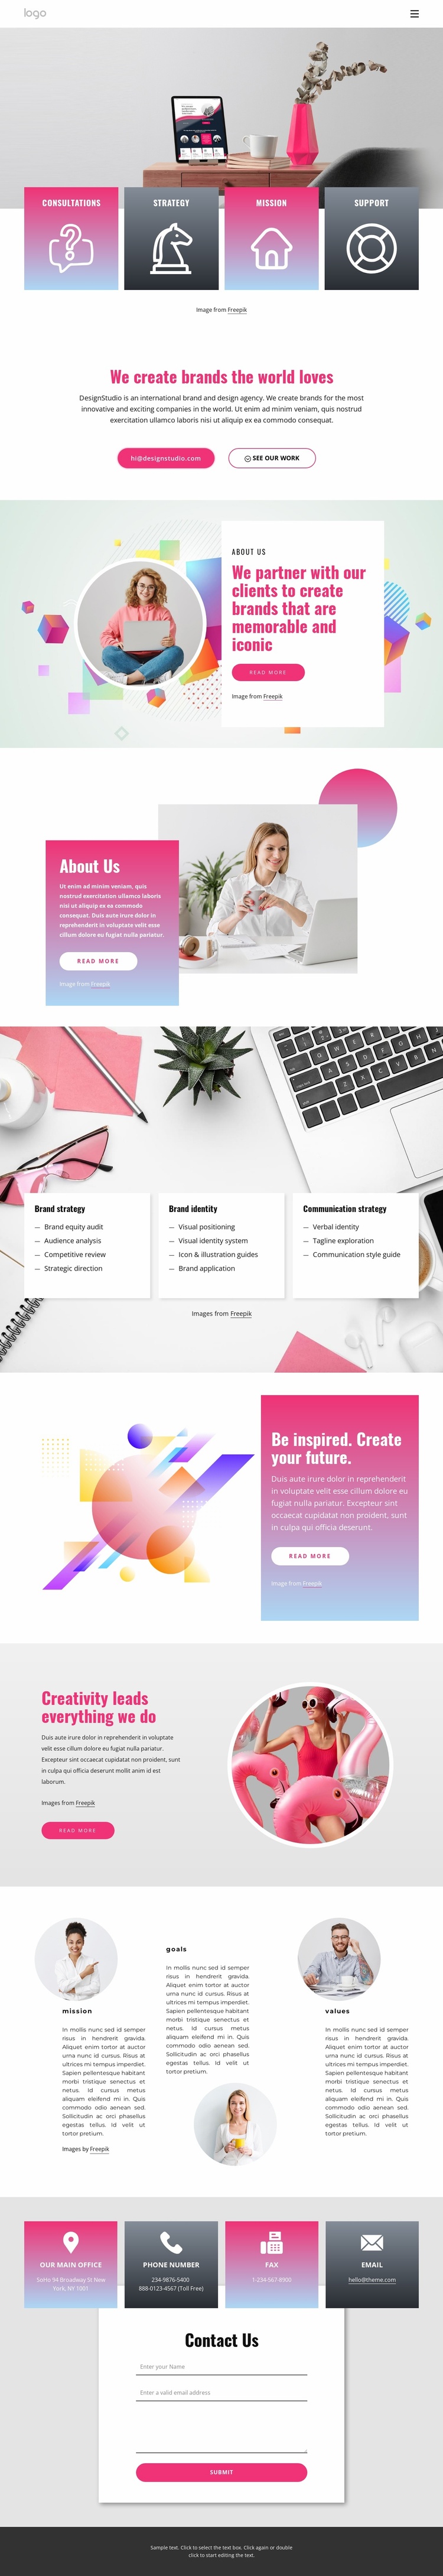 Creativity leads everything we do Website Template